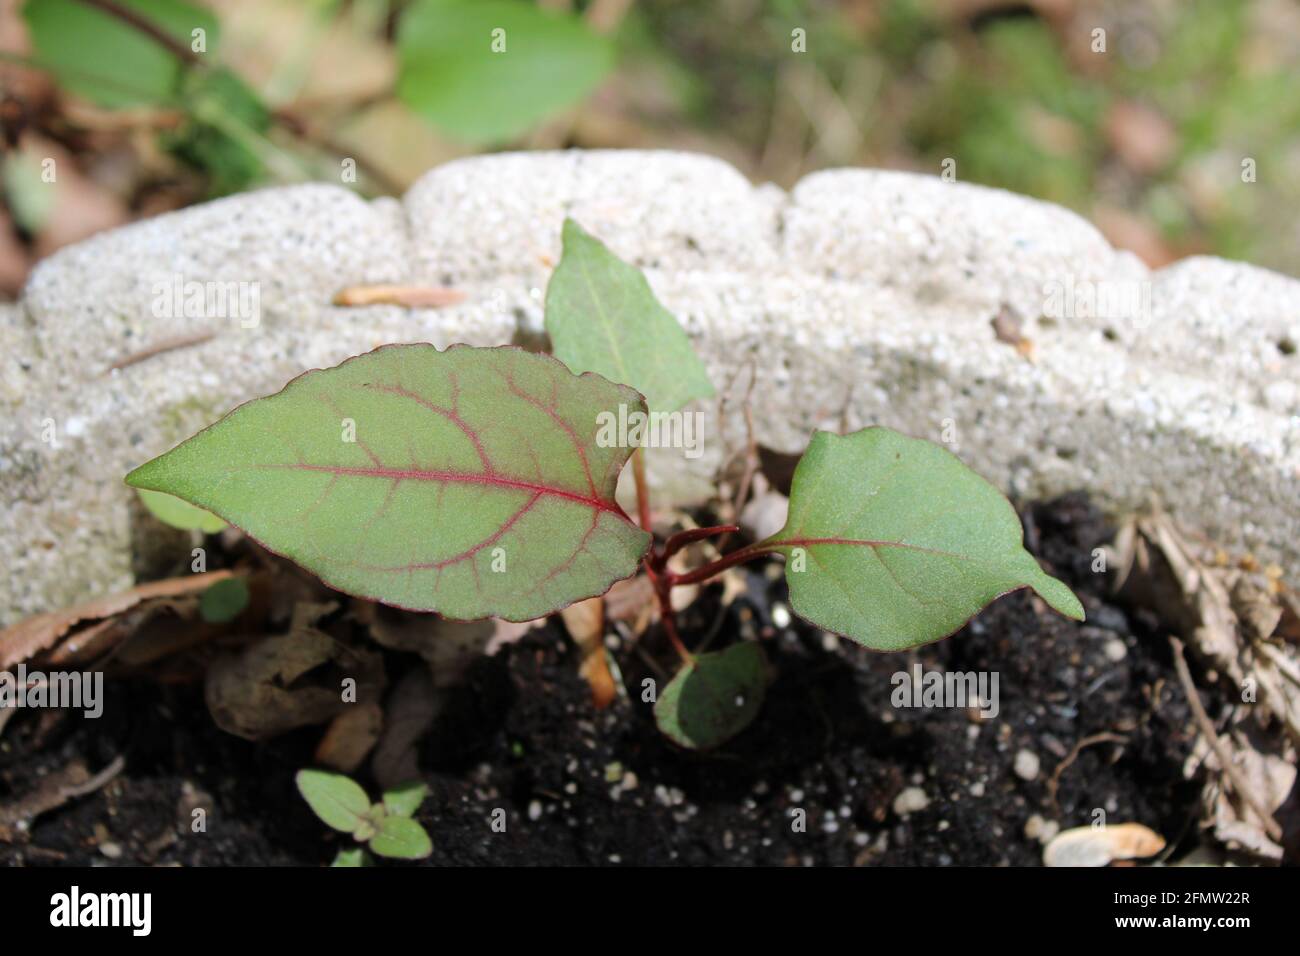 Un giapponese Knotweed Sprout Foto Stock